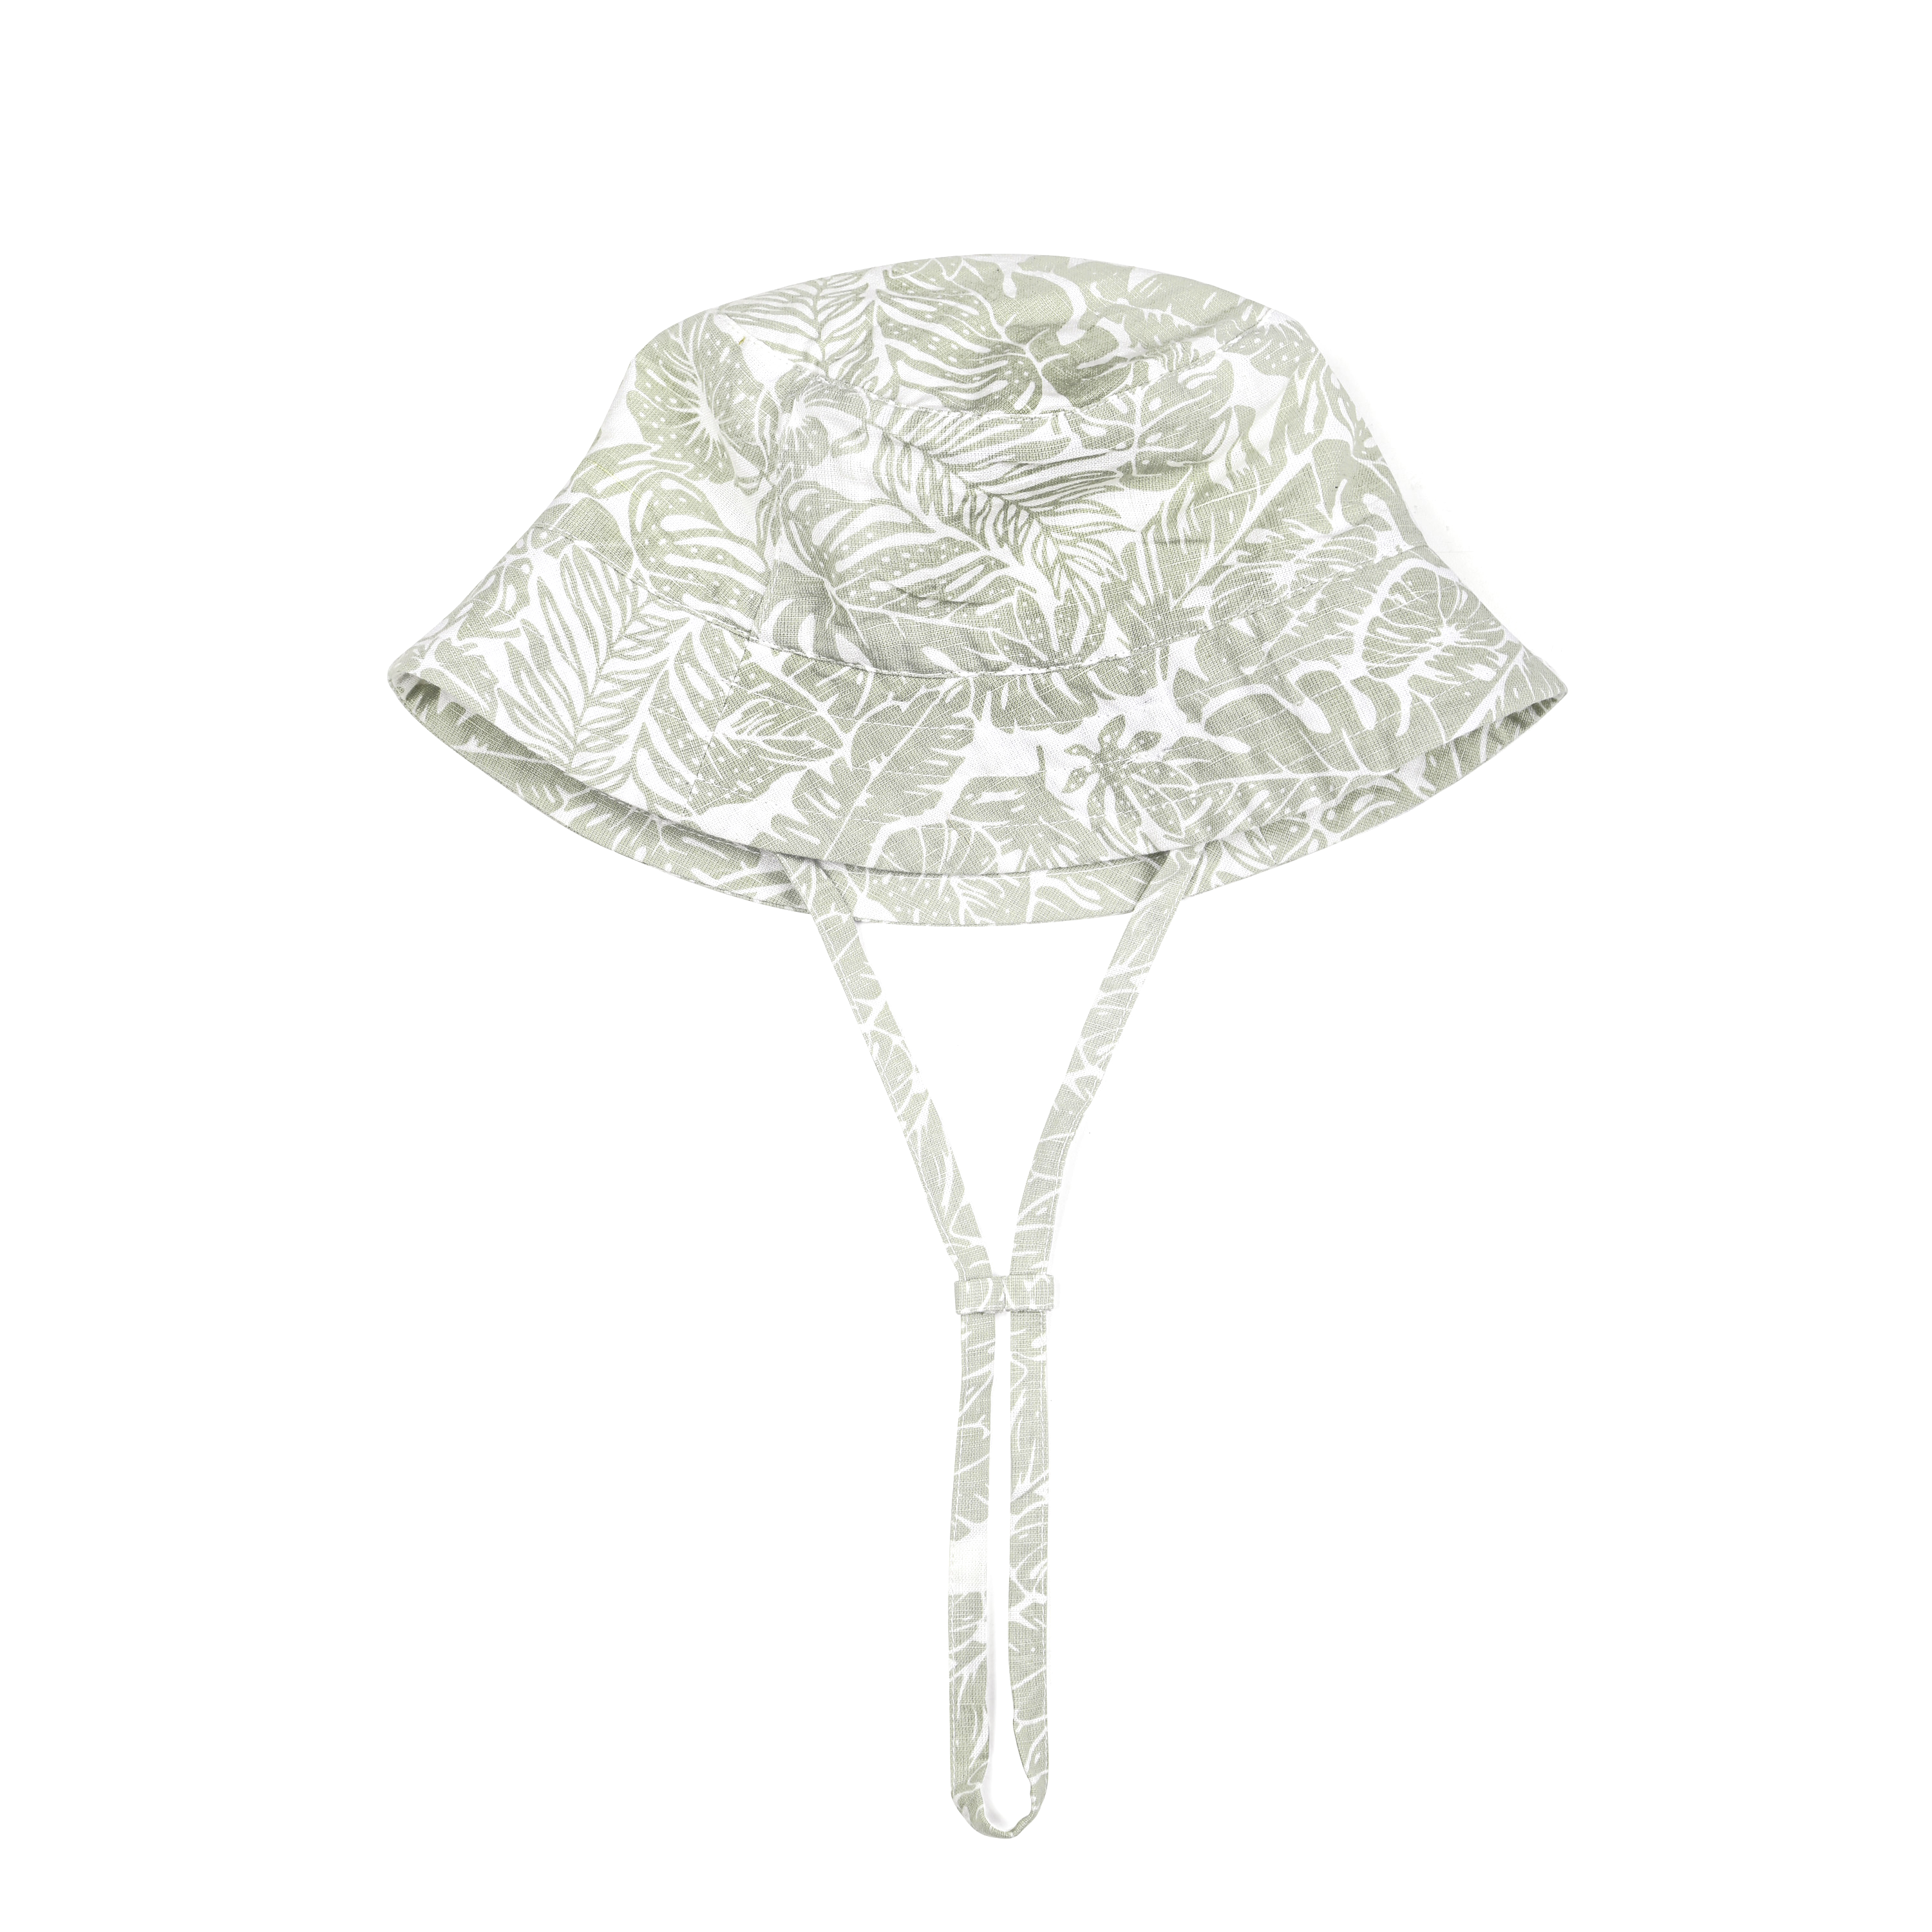 A toddler's Organic Linen Bucket Sun Hat with a Palms print, featuring wide brims and a chin strap, isolated on a white background from Makemake Organics.